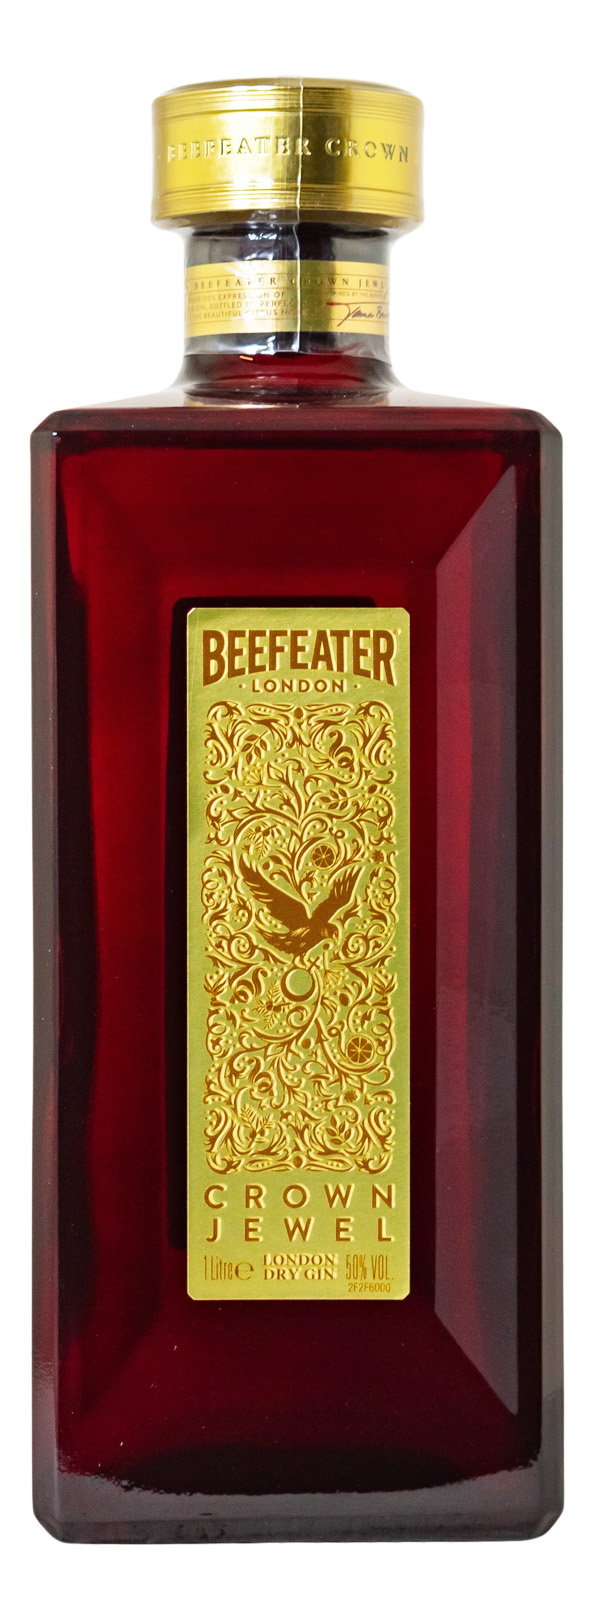 Beefeater Crown Jewel London Dry Gin - 1 Liter 50% vol